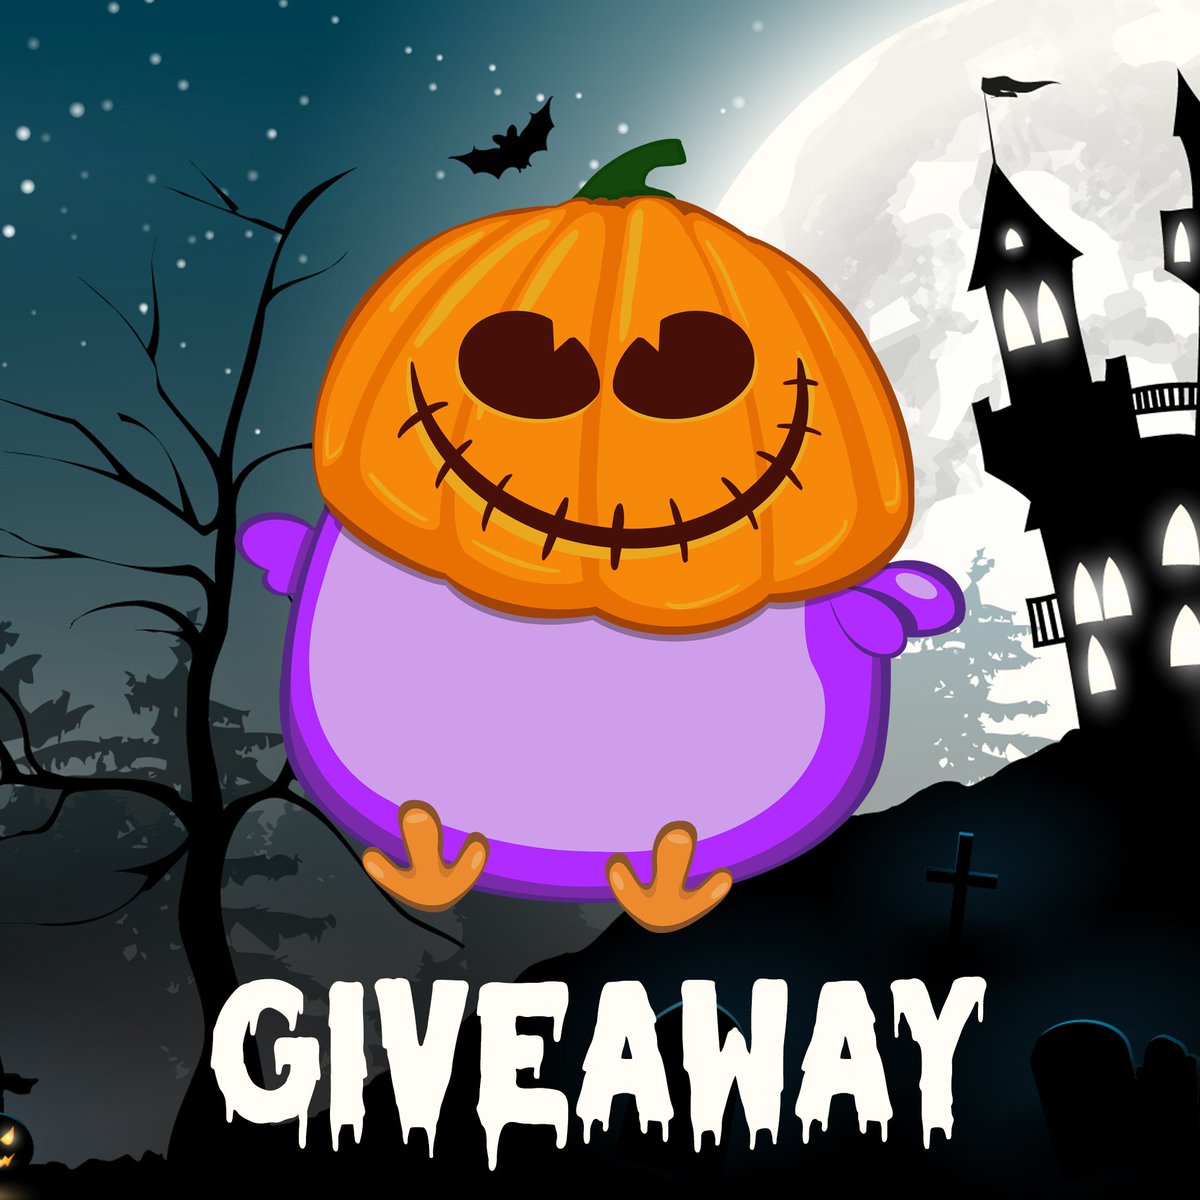 Our special Halloween GIVEAWAY starts now! 20 WL spots available for Flappy Birds NFT.🧙‍♀️ Special prize: 1 FLAPPY BIRD🎃 ❗️To enter: - Follow @FlappyBirds_NFT - RT this post - Tag 2 friends ⏱️48H #NFT #NFTs #NFTGiveaway #FlappyBird #FlappyBirds